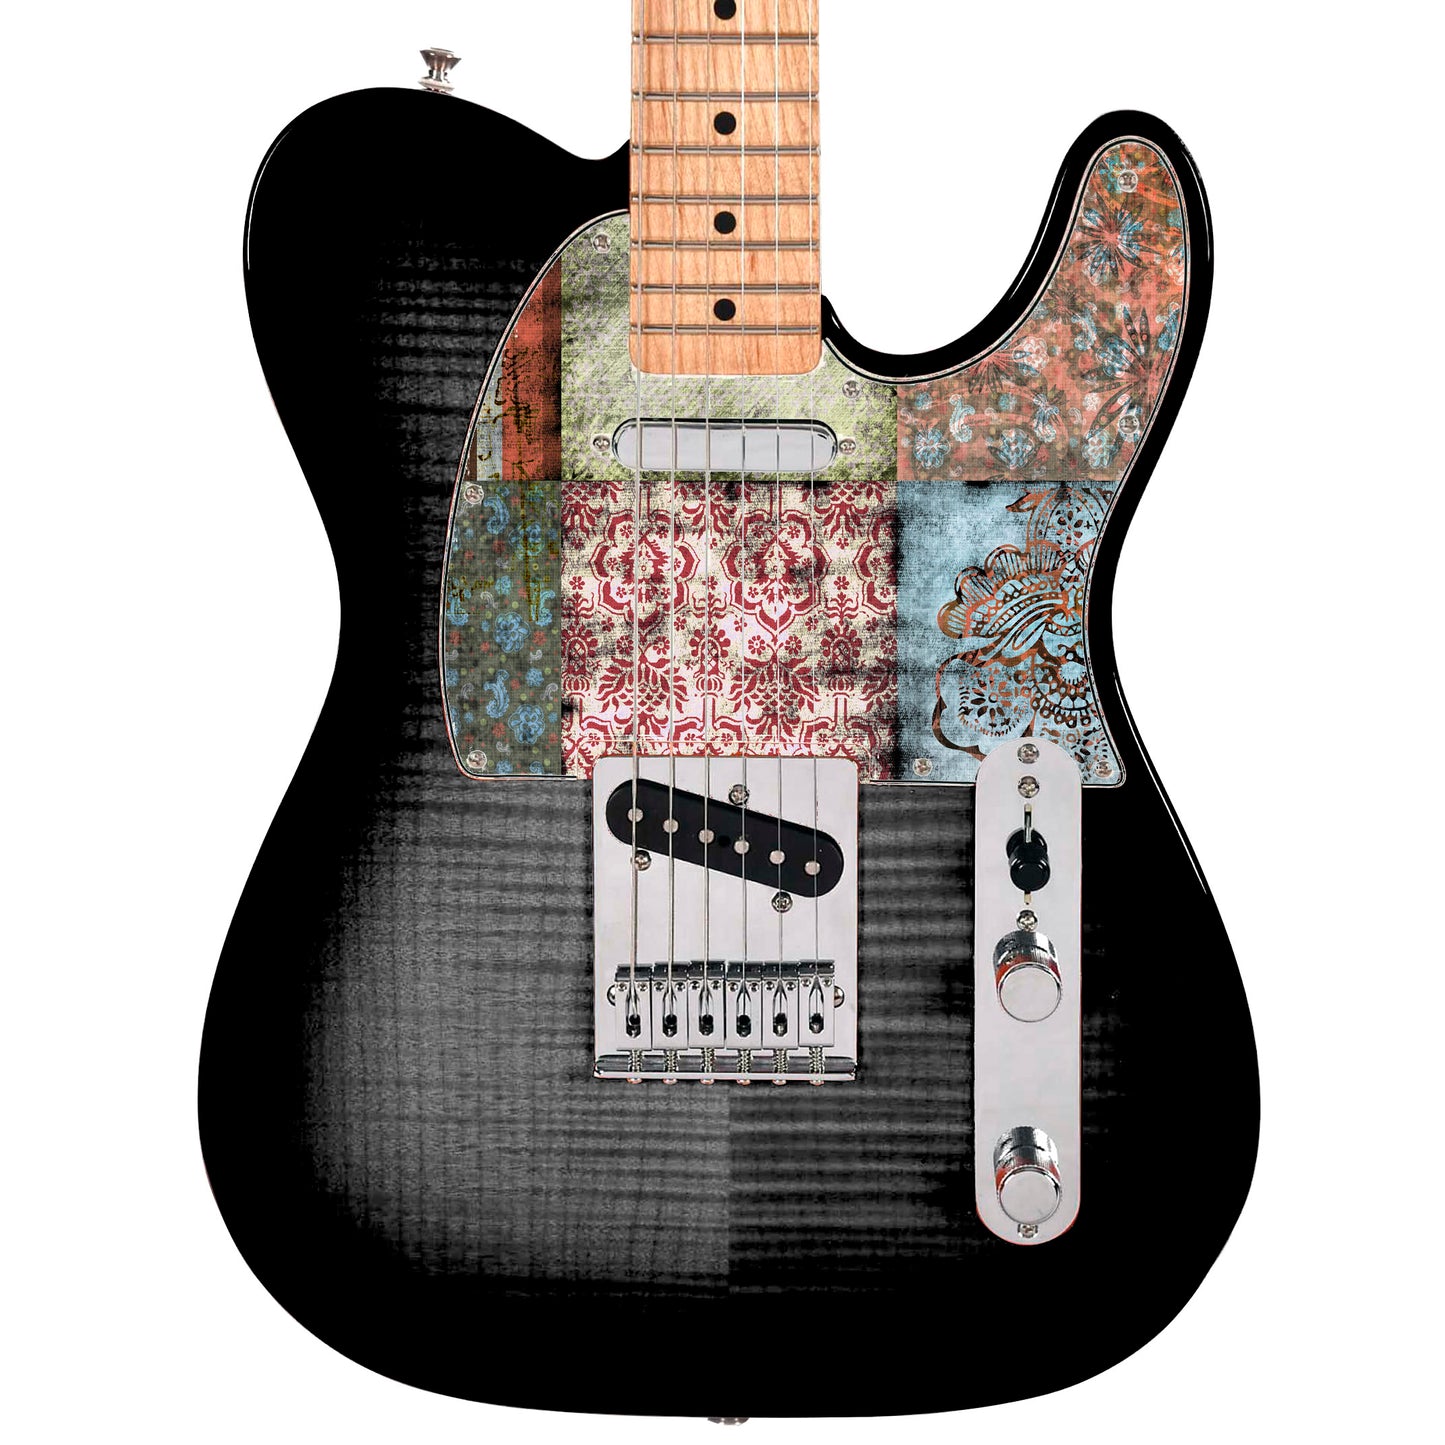 Guitar Custom PickGuard Sticker Skins. Customise your own existing Pickguard, Headstock, Tremolo Cover plate. The Quilted Patches PK01